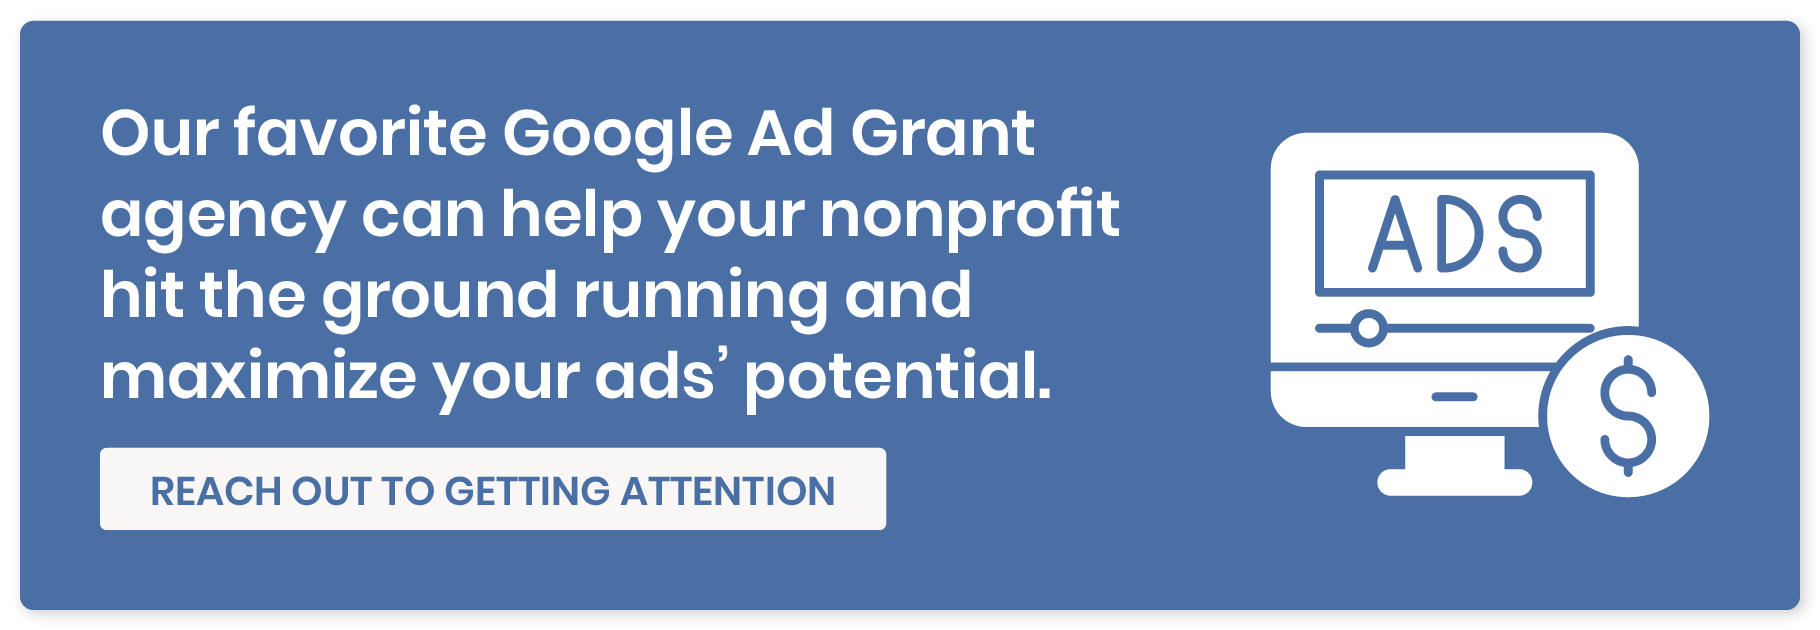 Our favorite Google Ad Grant agency can help your nonprofit hit the ground running and maximize your ads' potential. Reach out to Getting Attention. 